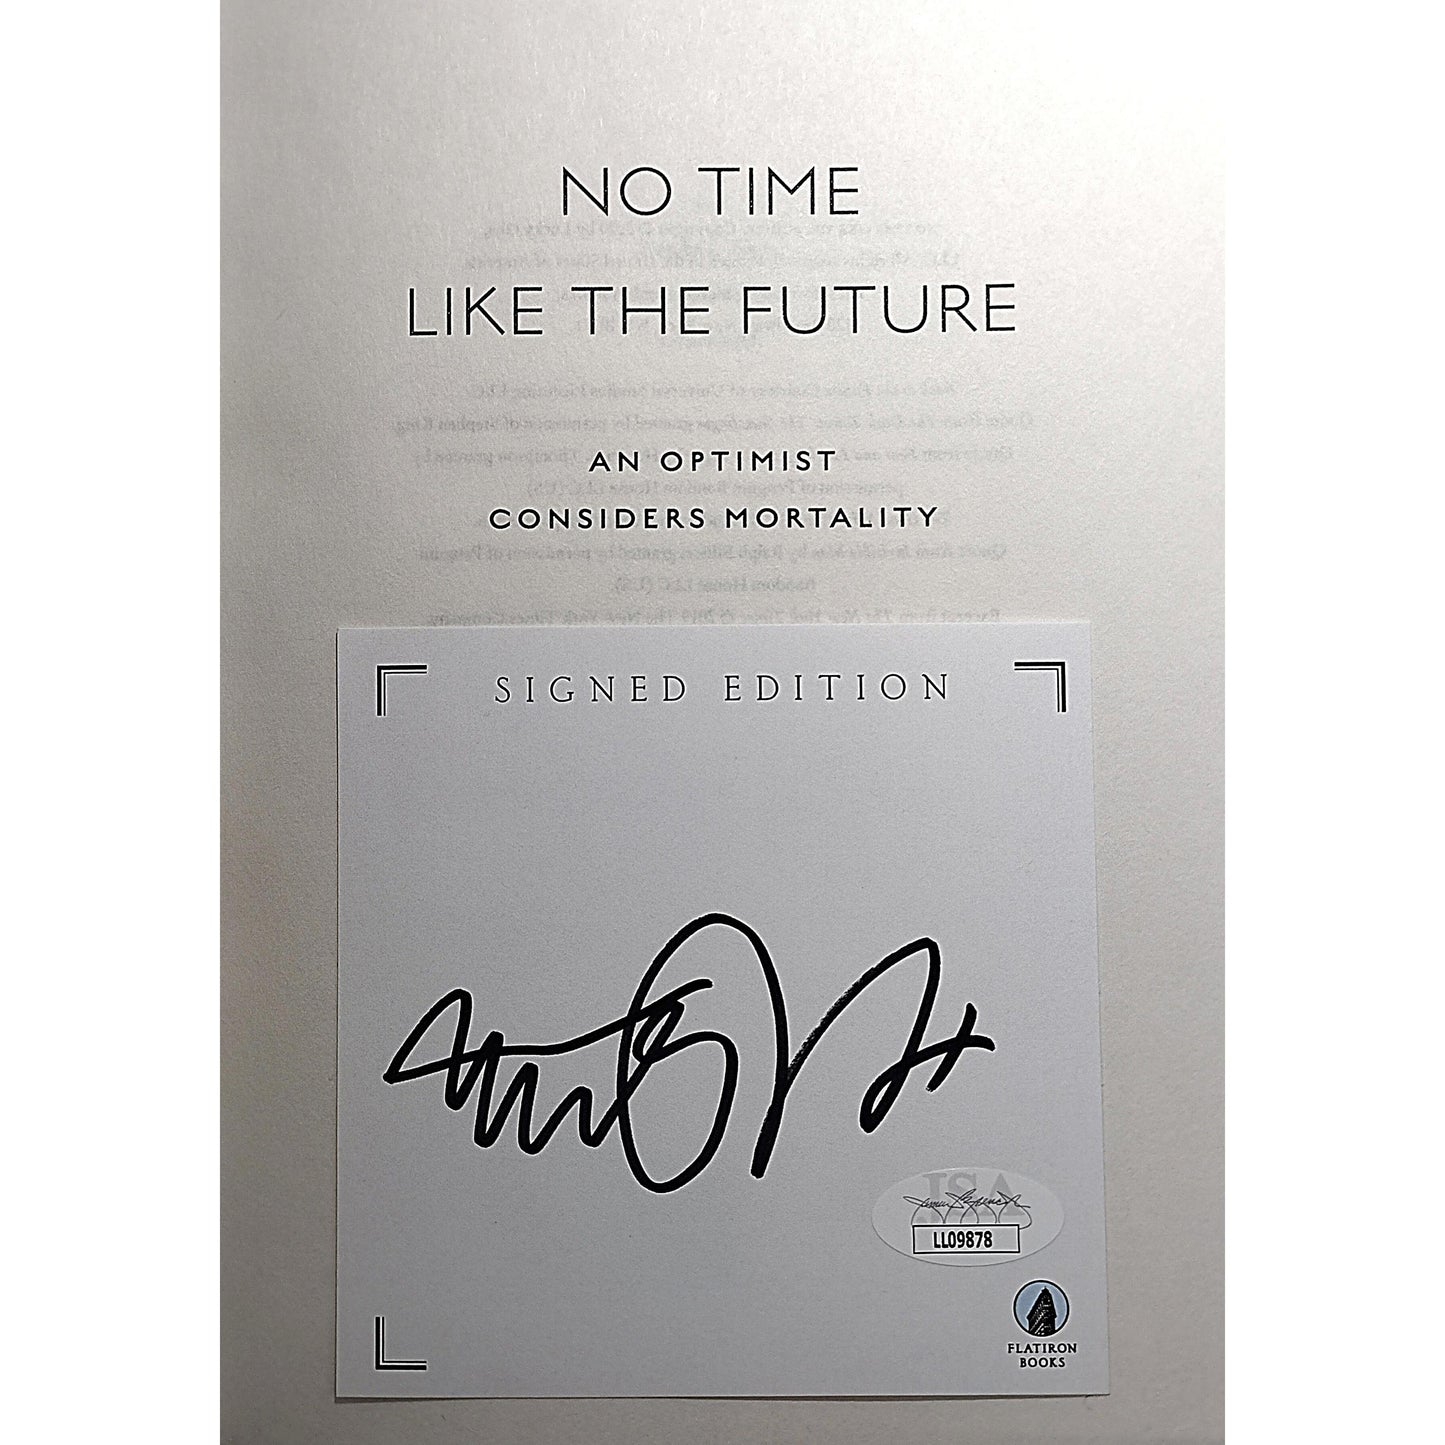 Hollywood- Autographed- Michael J. Fox Signed No Time Like The Future Hardcover 1st Edition Book with Bookplate JSA Authentication LL09878 - 106